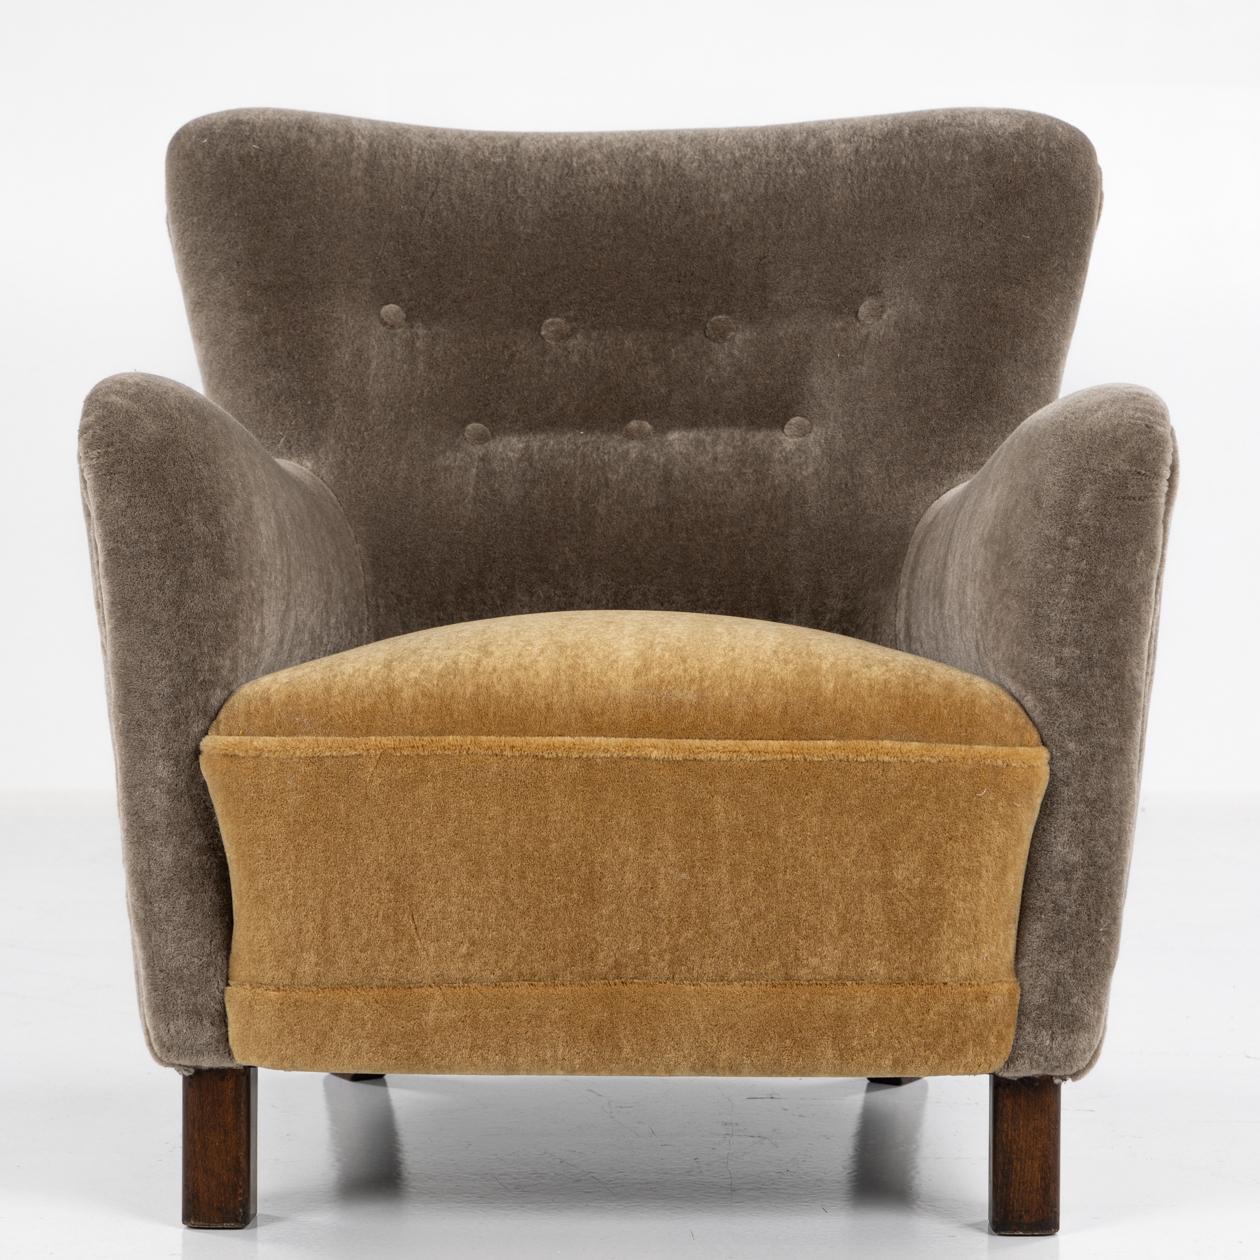 Pair of FH 1669 - Reupholstered lounge chair in 'Teddy Mohair' by Pierre Frey (colour codes 007 and 003) with legs in stained beech. Designed c. 1938 by Fritz Hansen.